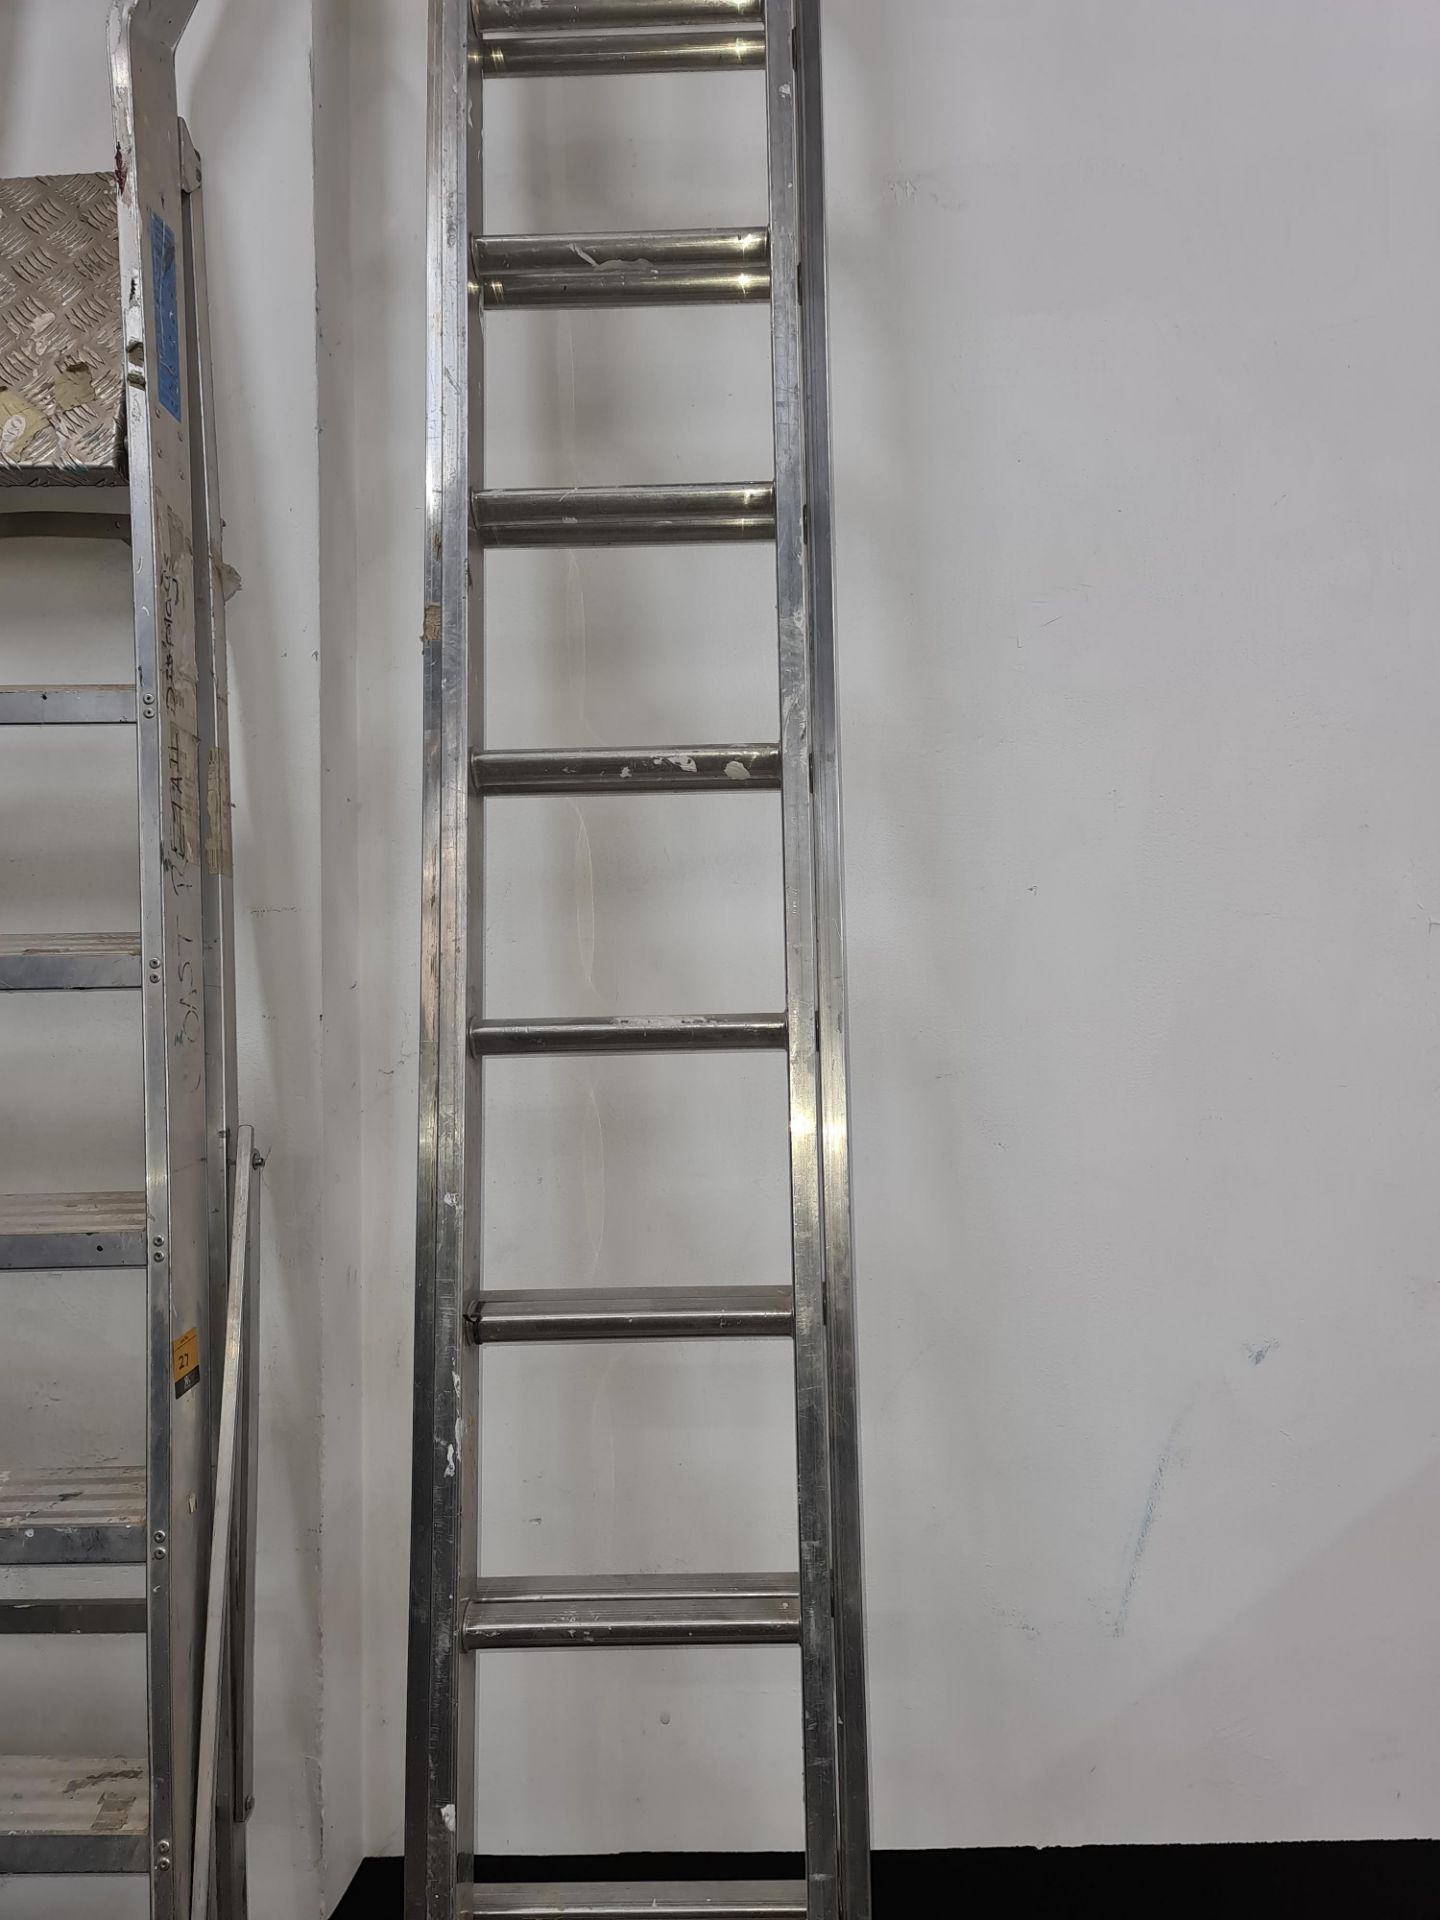 Set of double rung ladders, each length measuring approx. 11.5ft - Image 3 of 4